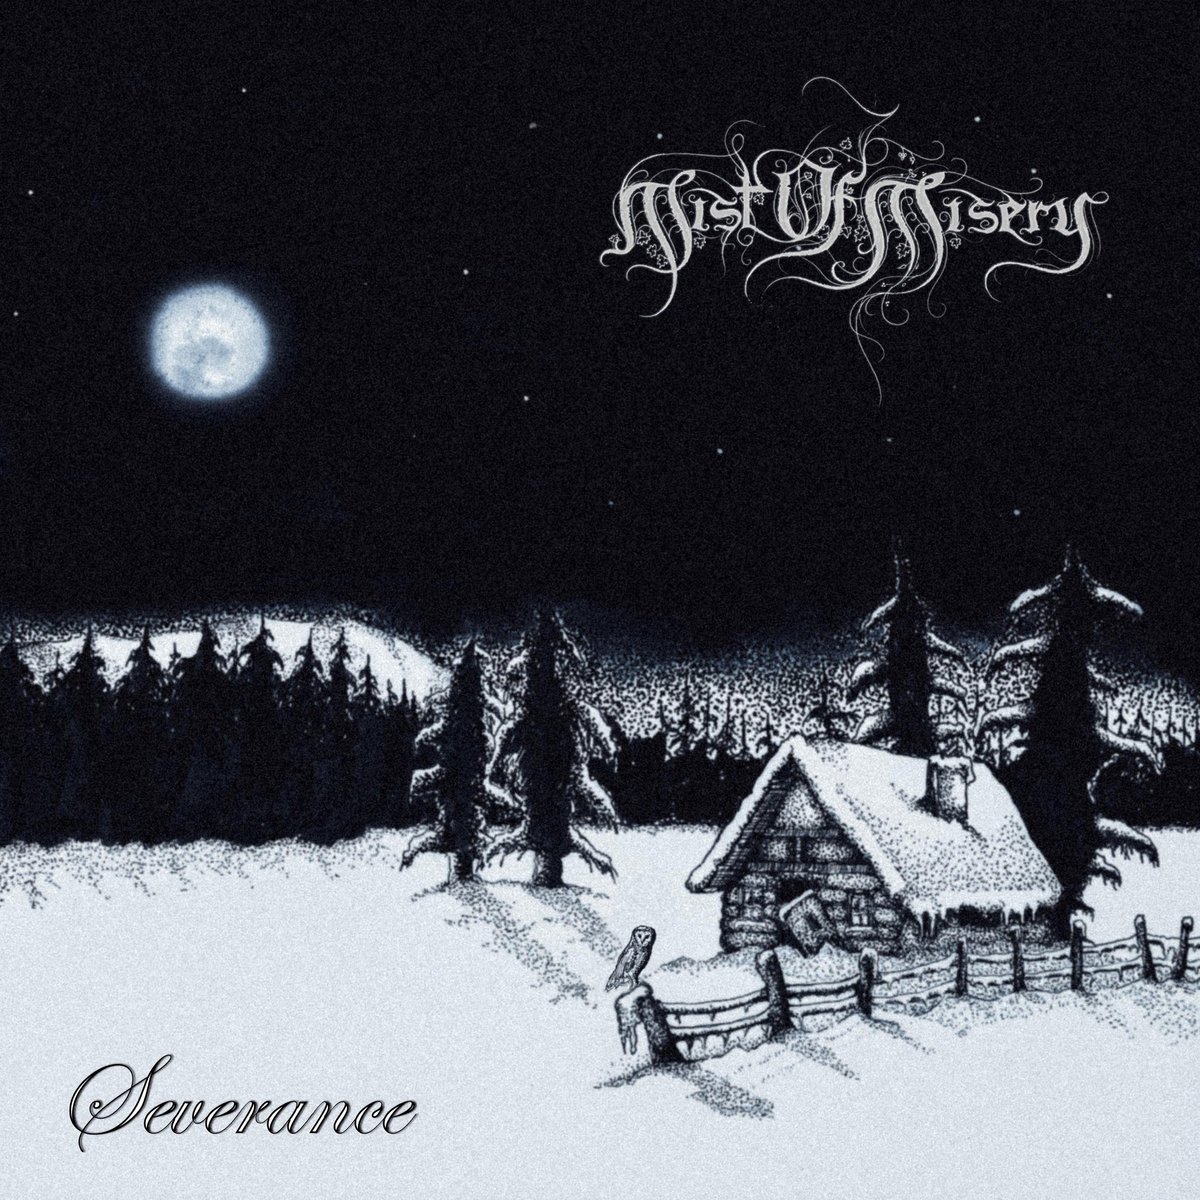 Mist of Misery - Severance (2022) FLAC Download